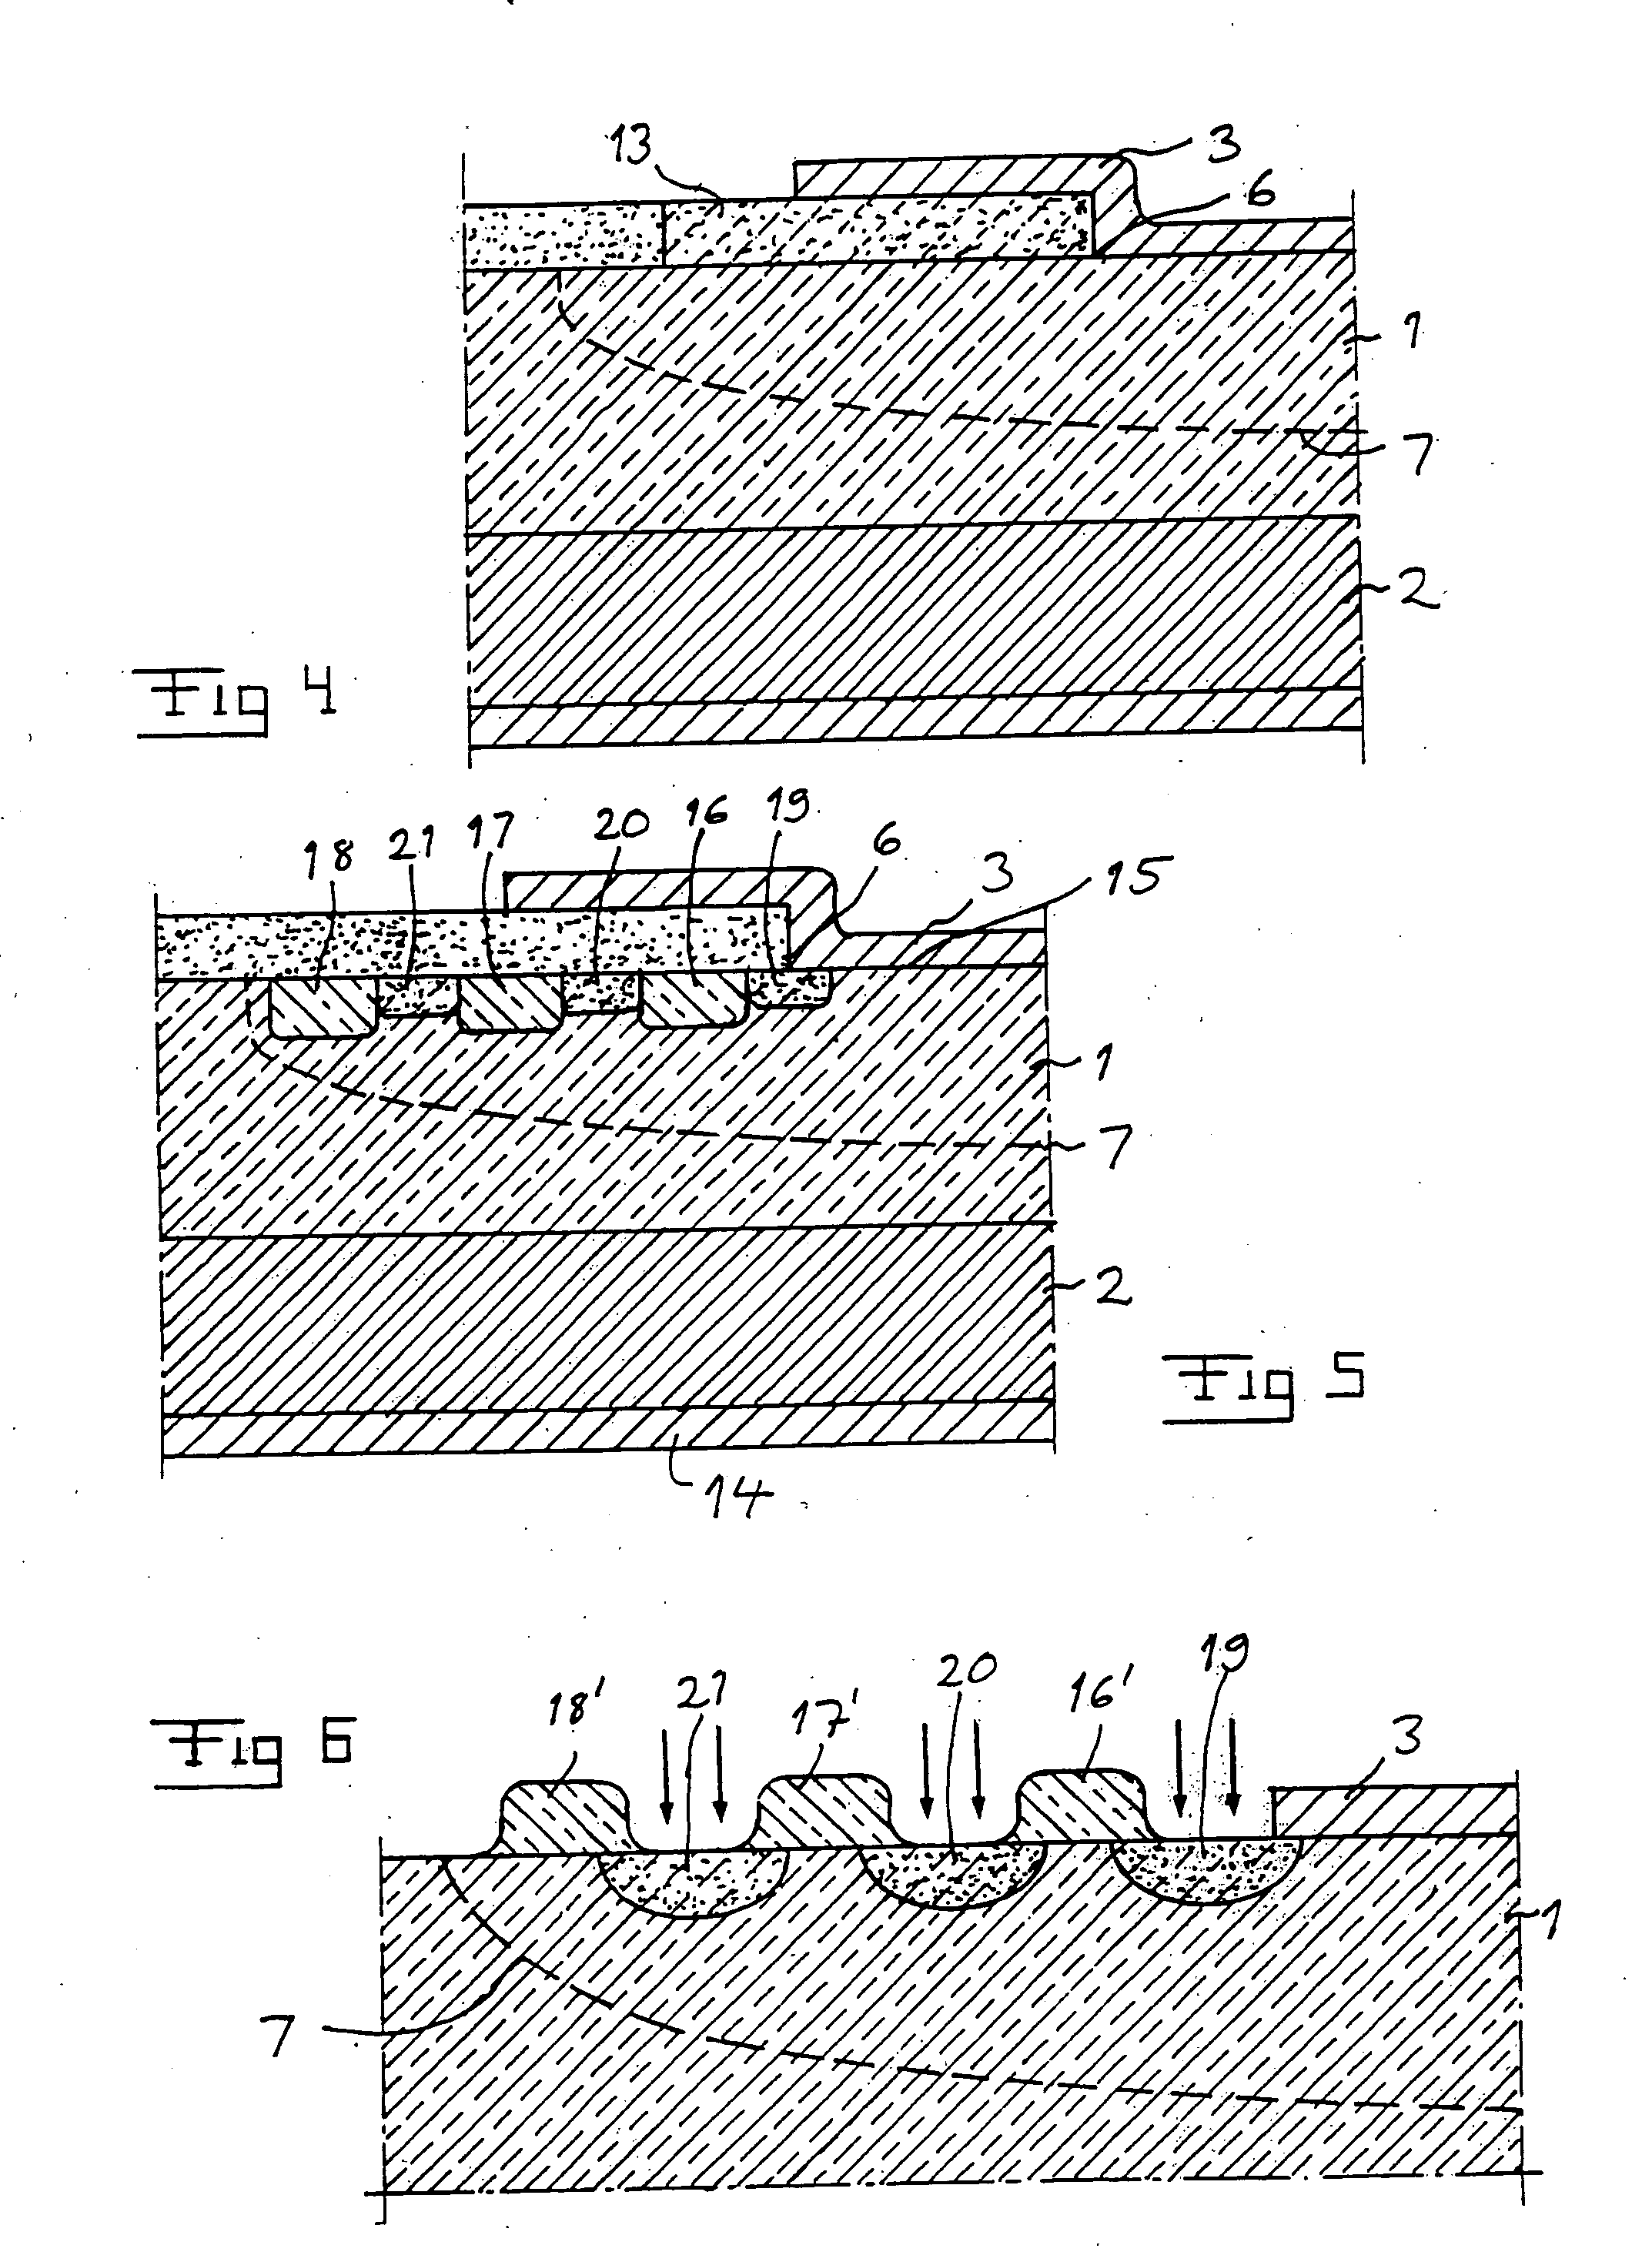 Semiconductor device and a method for production thereof